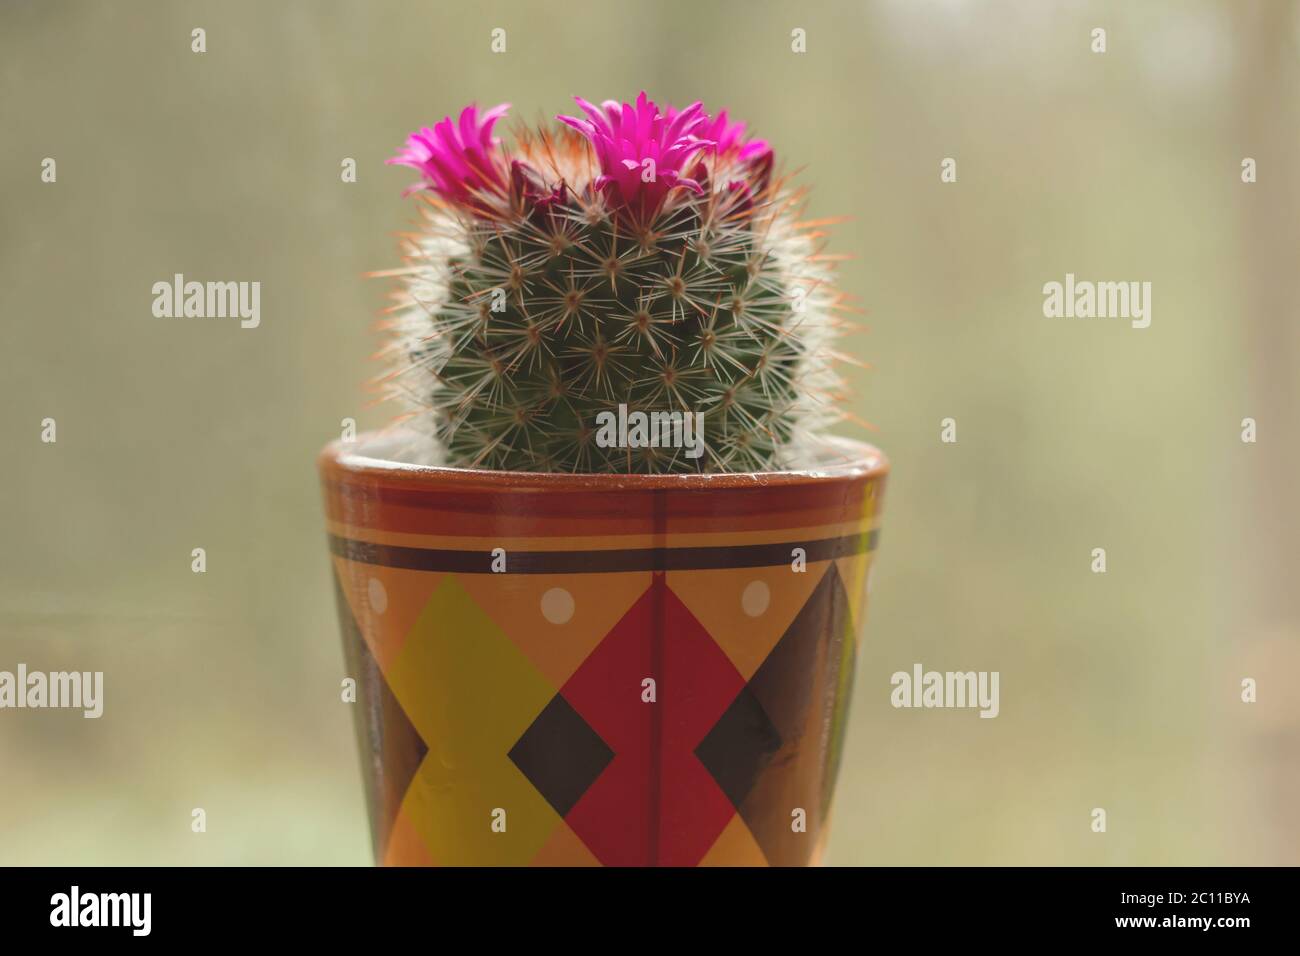 Mammillaria spinosissima cactus with blooming flowers Stock Photo